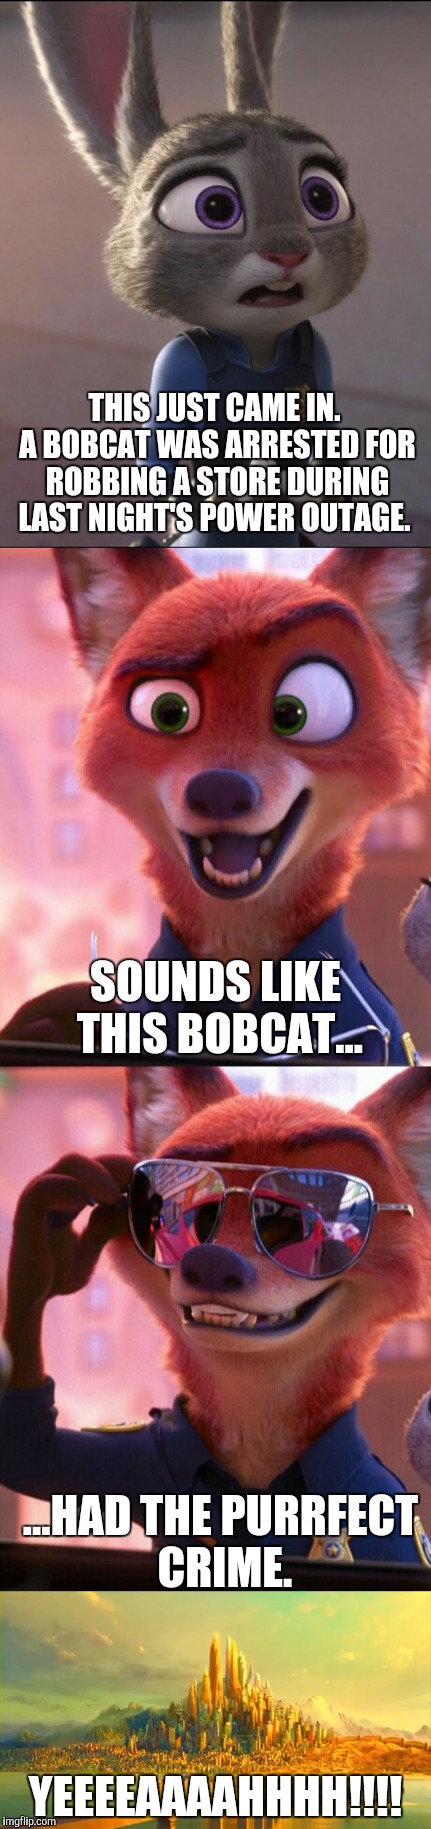 CSI: Zootopia 8 | THIS JUST CAME IN. A BOBCAT WAS ARRESTED FOR ROBBING A STORE DURING LAST NIGHT'S POWER OUTAGE. SOUNDS LIKE THIS BOBCAT... ...HAD THE PURRFECT CRIME. YEEEEAAAAHHHH!!!! | image tagged in zootopia,judy hopps,nick wilde,parody,funny,memes | made w/ Imgflip meme maker